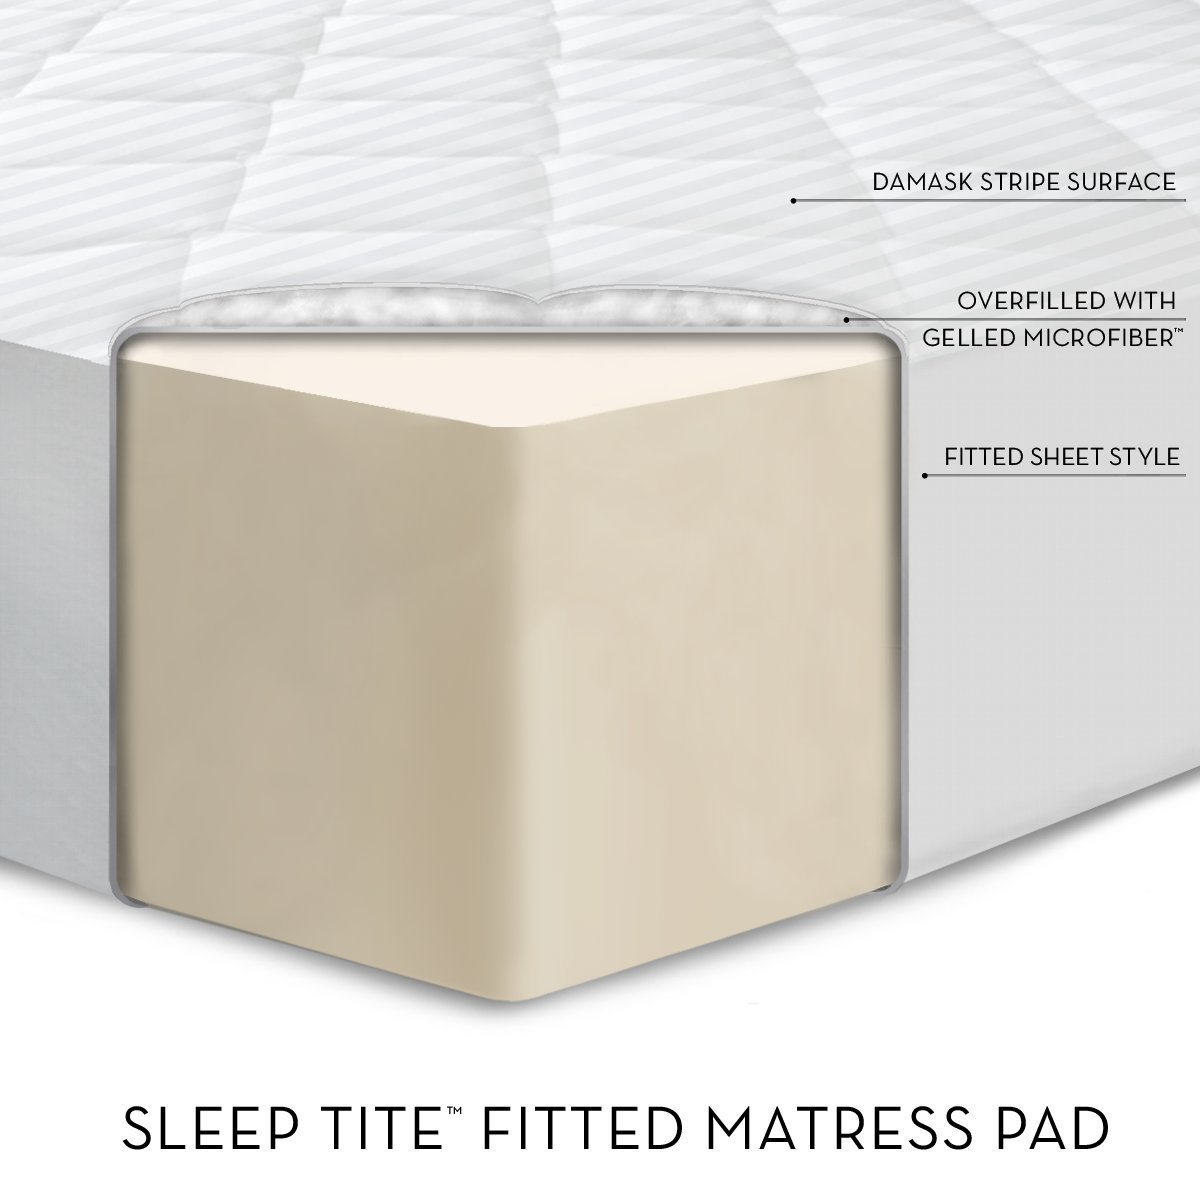 Quilted Mattress Pad - Gelled Microfiber Topper ONLY $21.99 SHIPPED ...